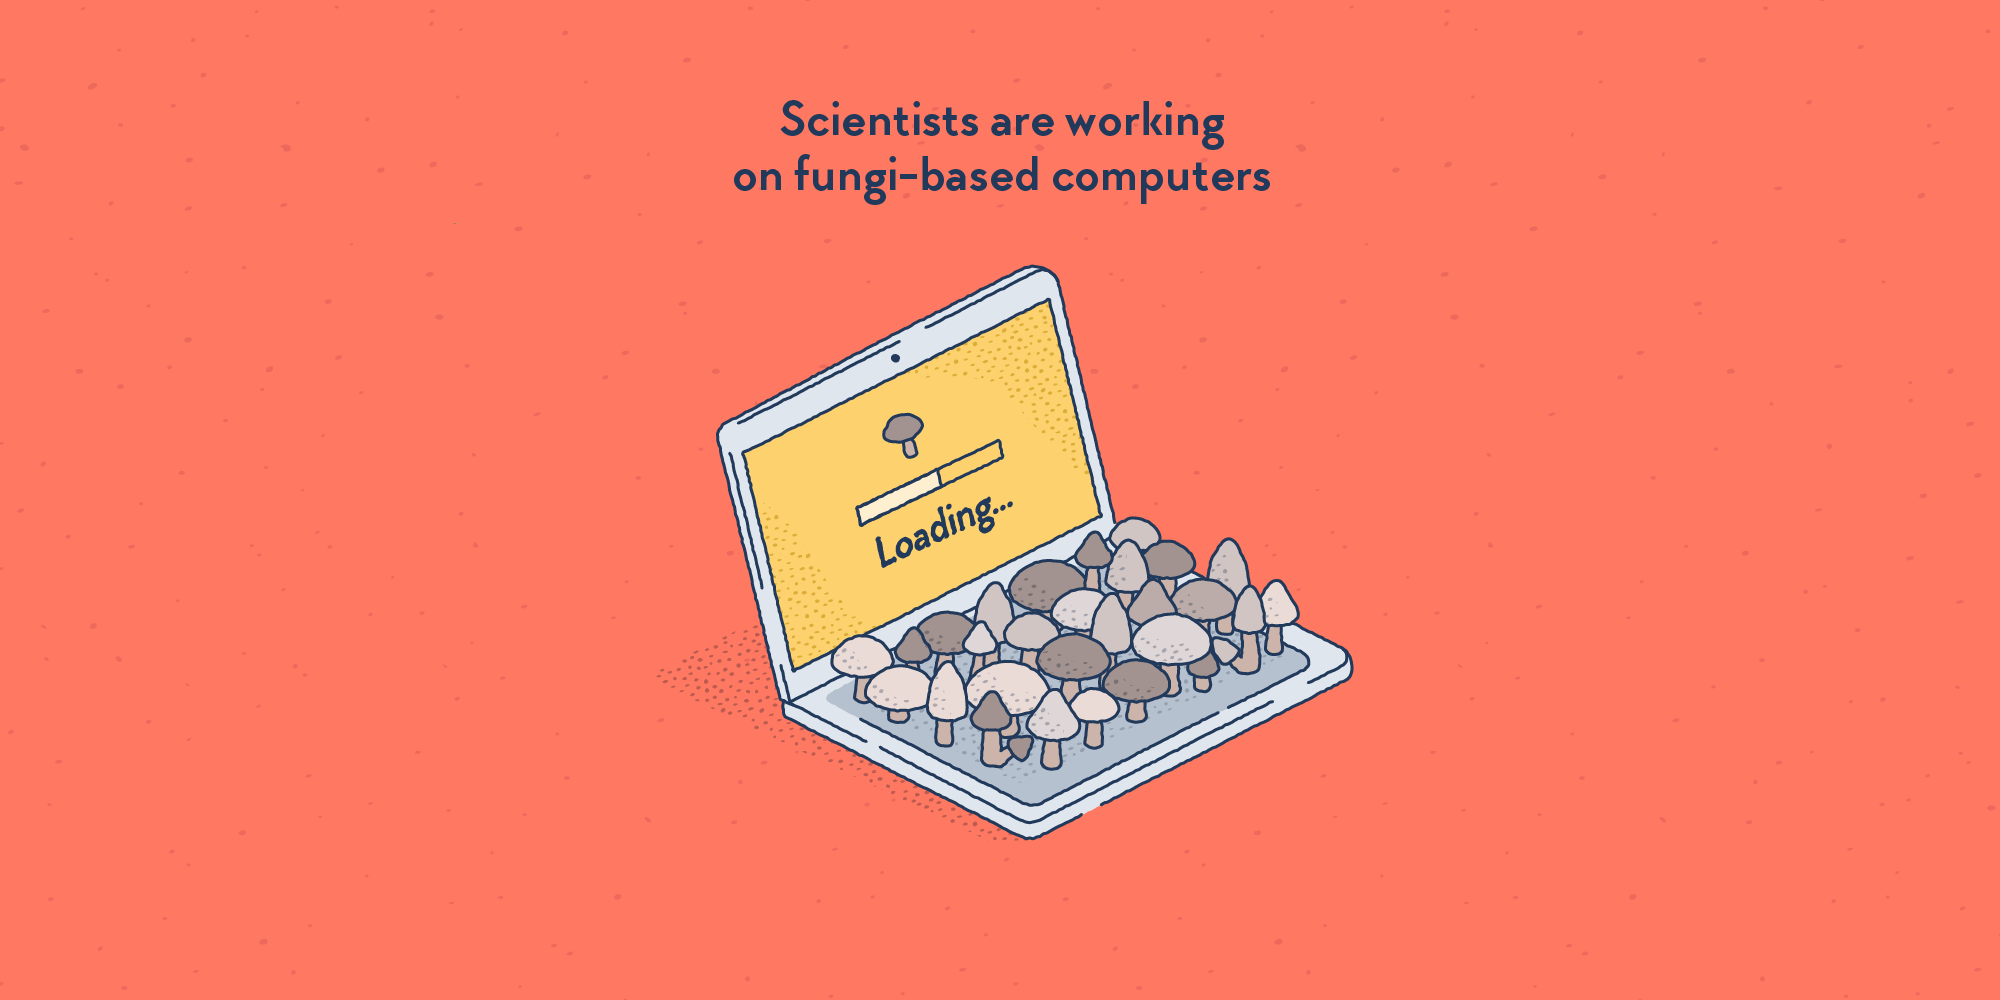 A laptop computer on which are growing a lot of mushrooms.